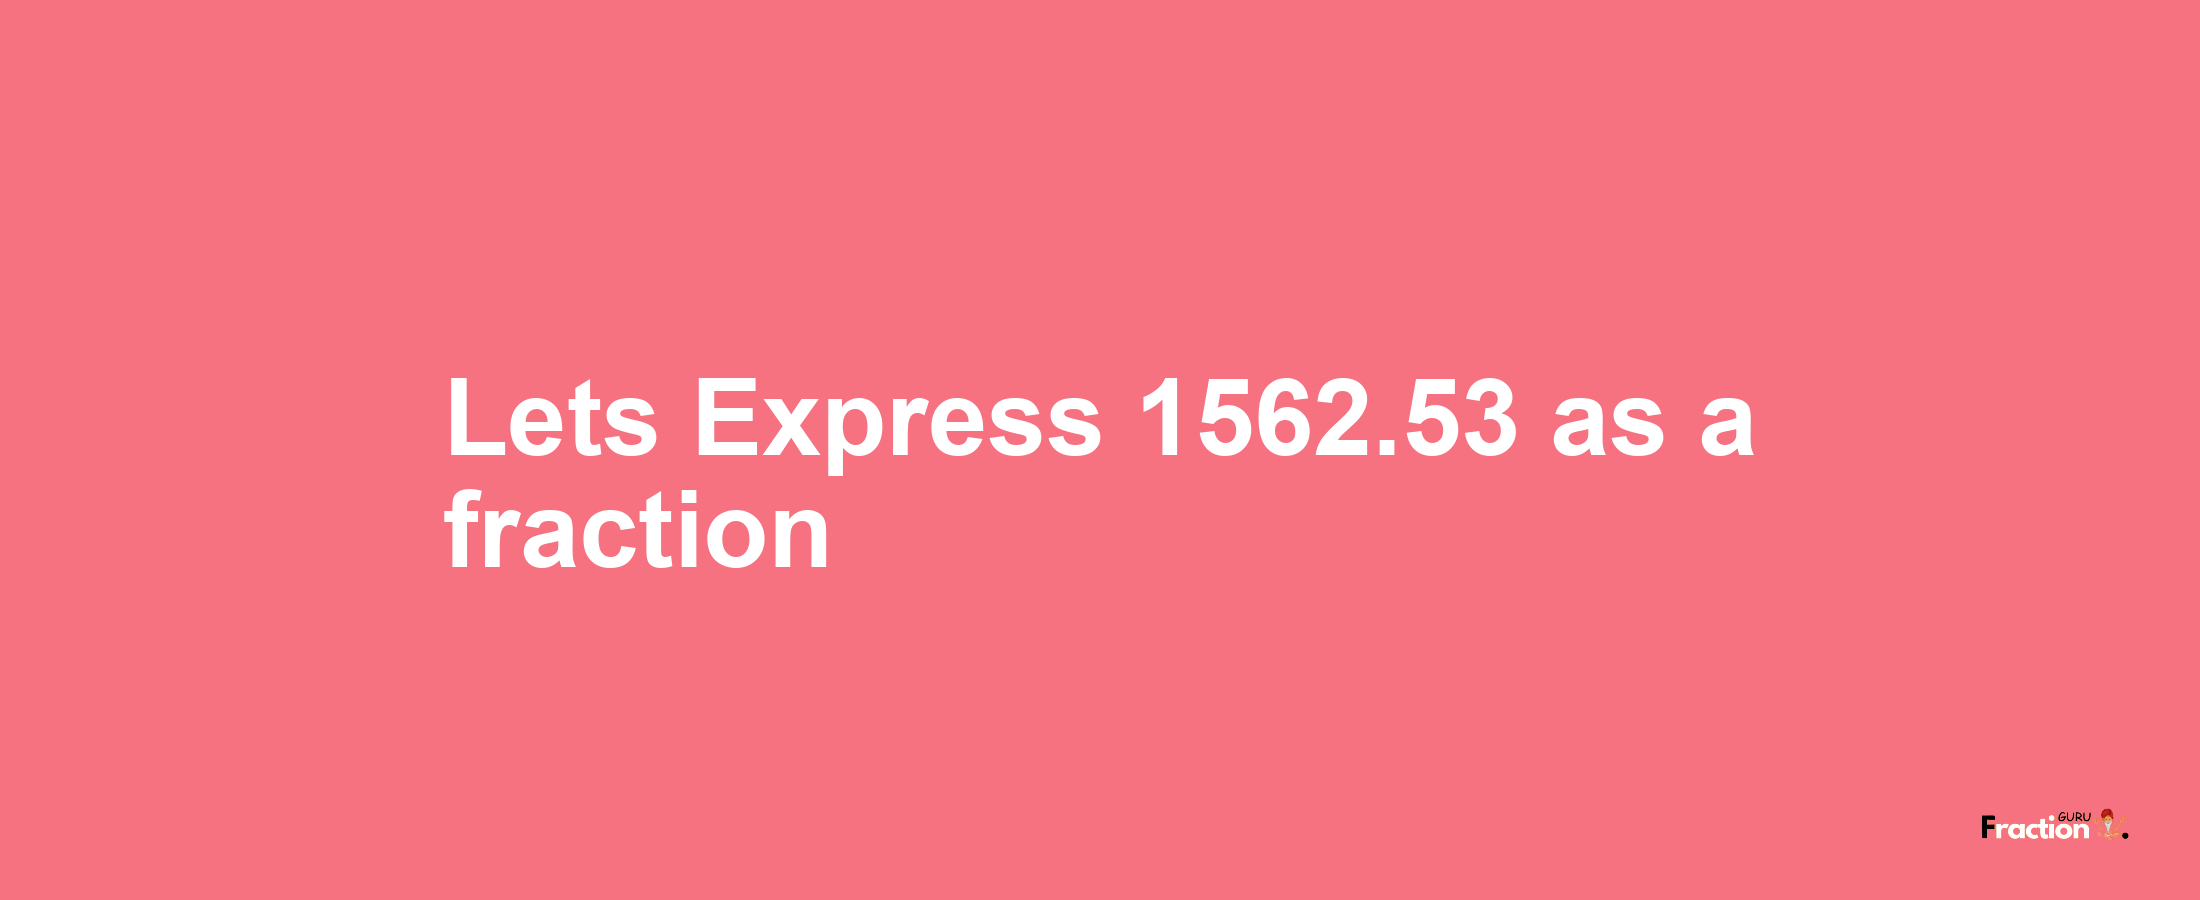 Lets Express 1562.53 as afraction